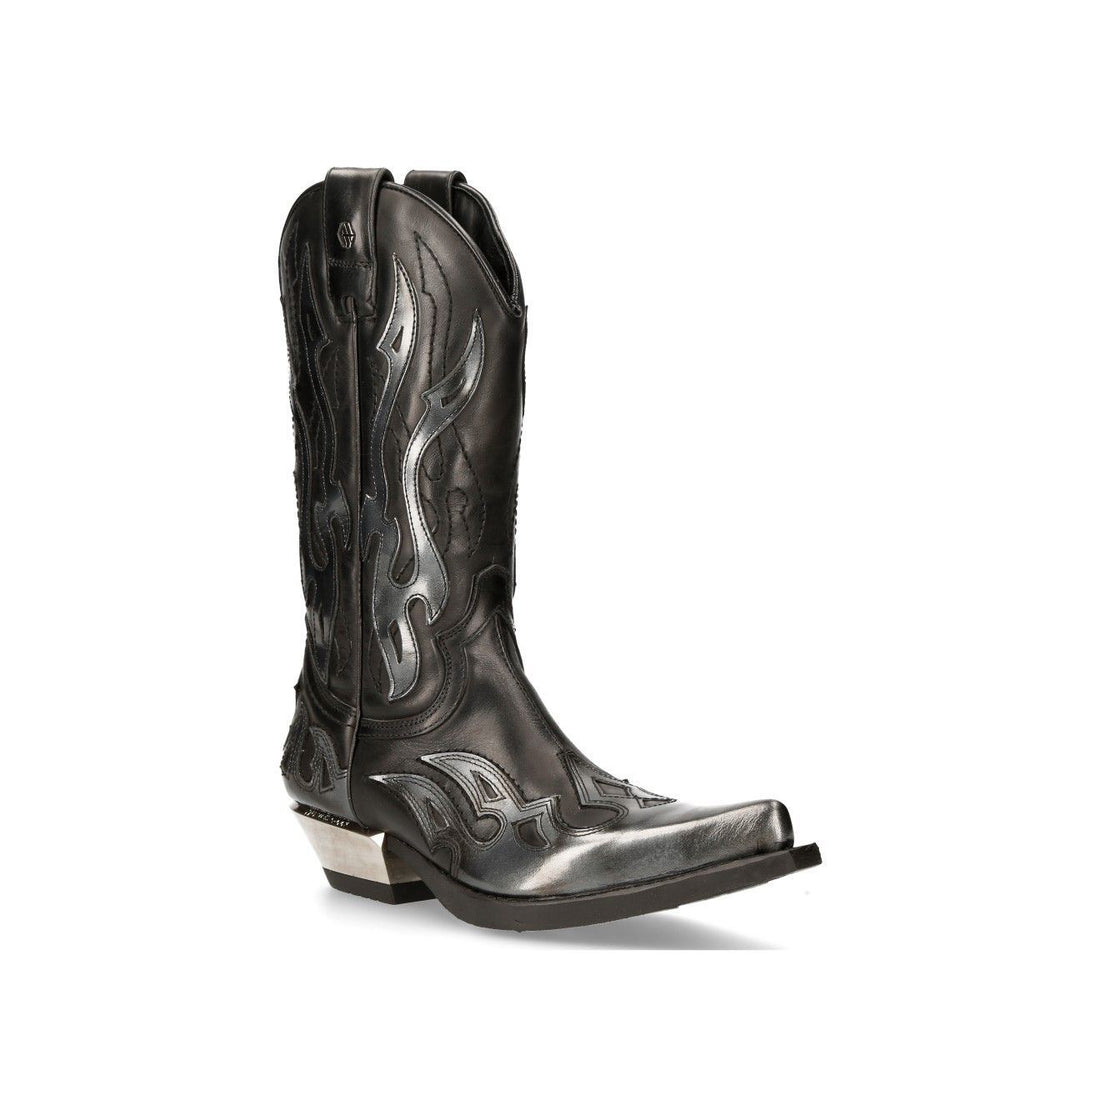 New Rock Flame Accented Black/Silver Leather Biker Cowboy Boots- M-7921-S3 - Upperclass Fashions 